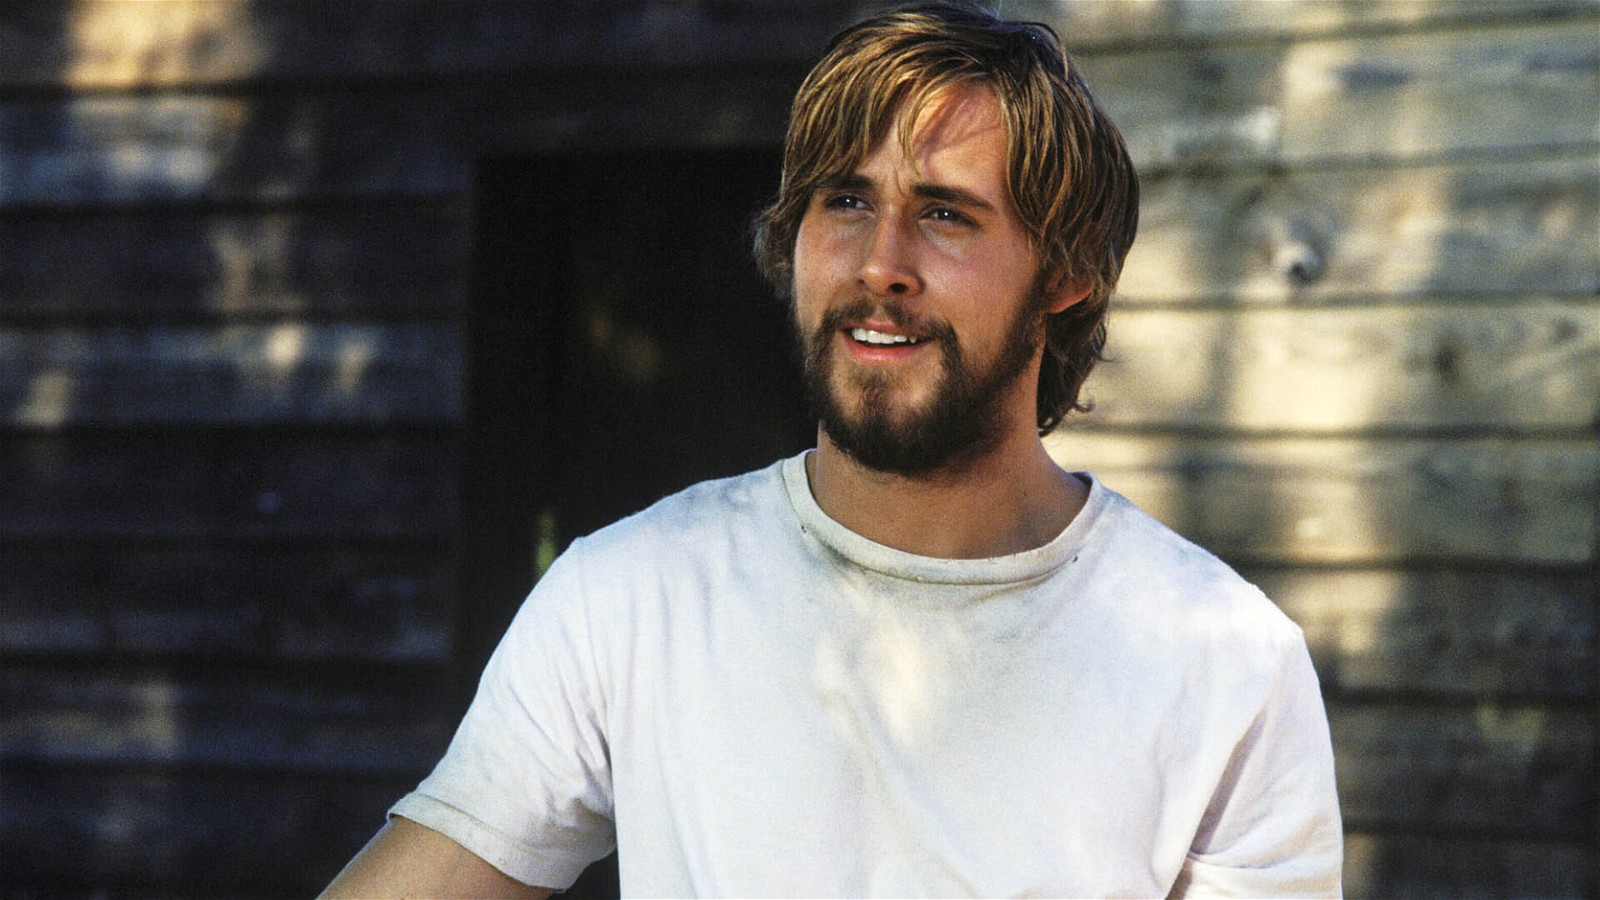 Ryan Gosling in a still from The Notebook